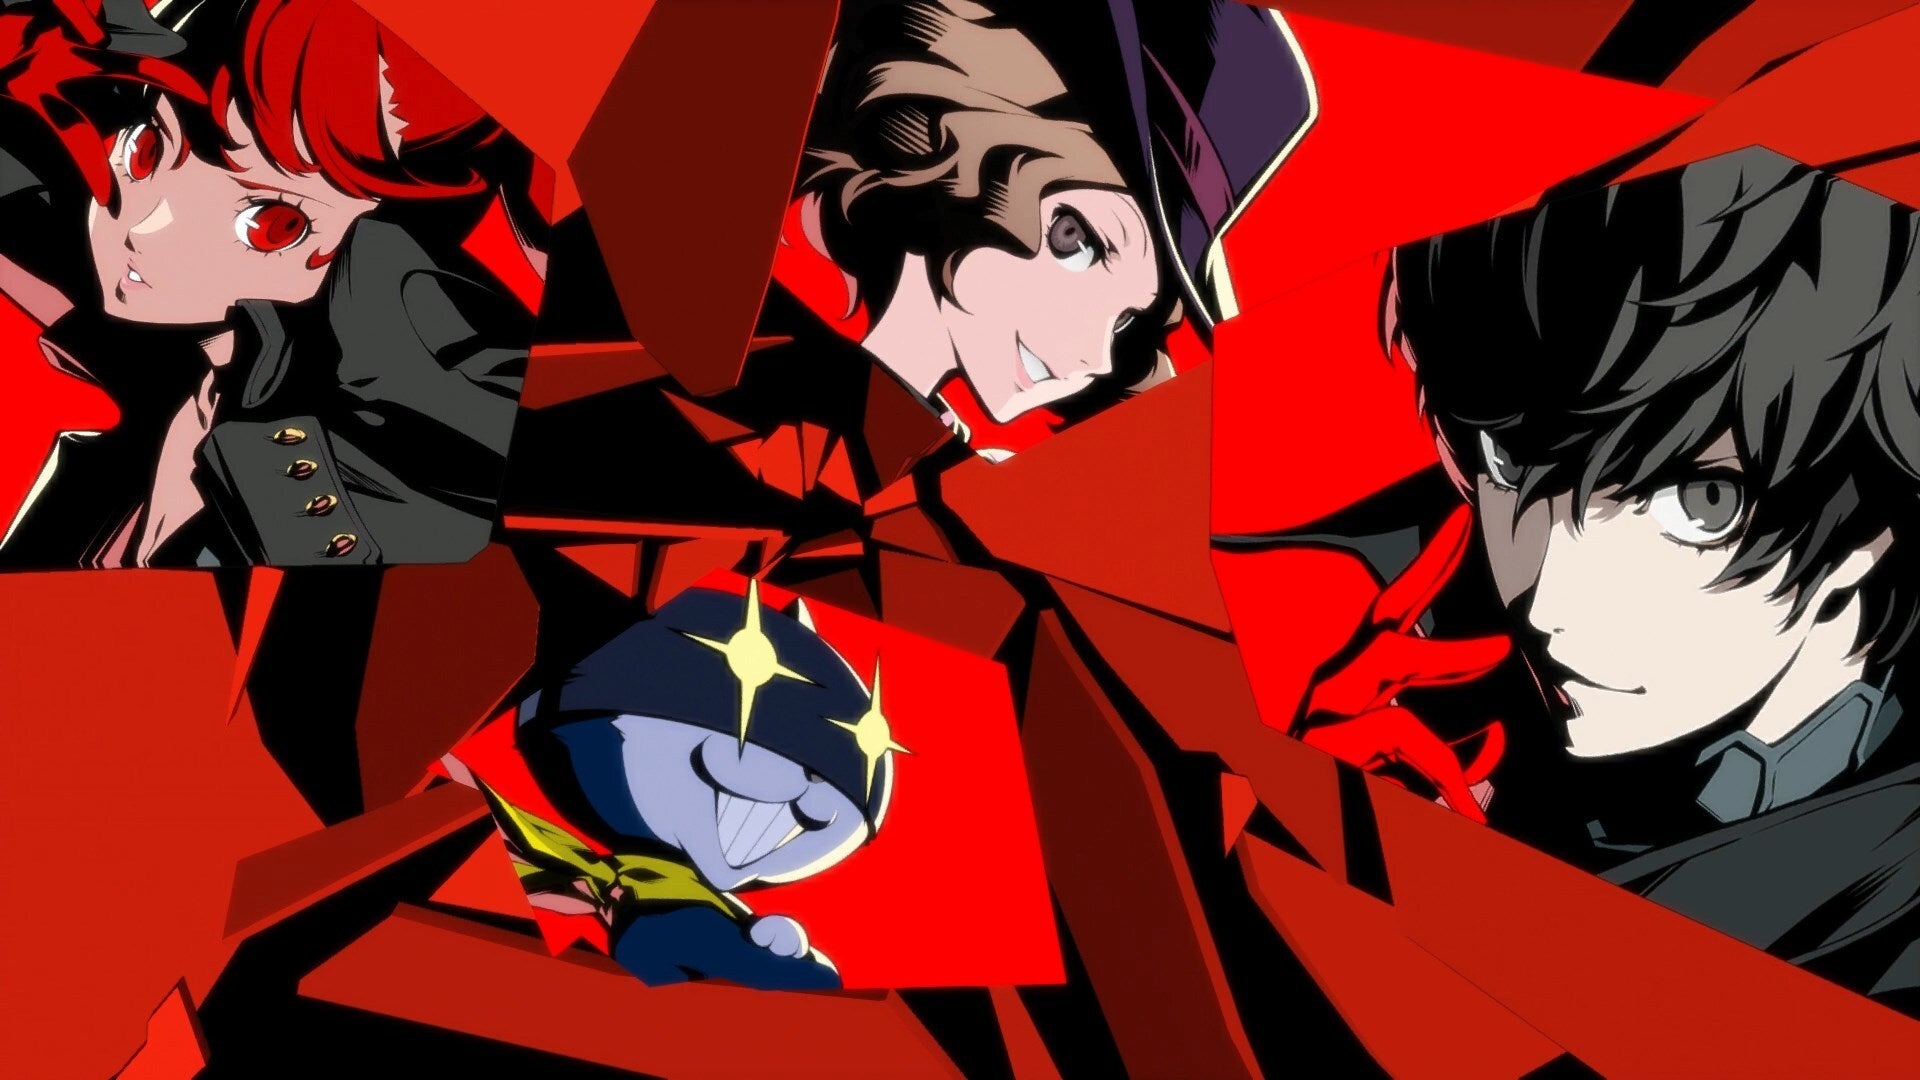 Persona 5 Royal Preview: Story tidbits are nice, but it's ne